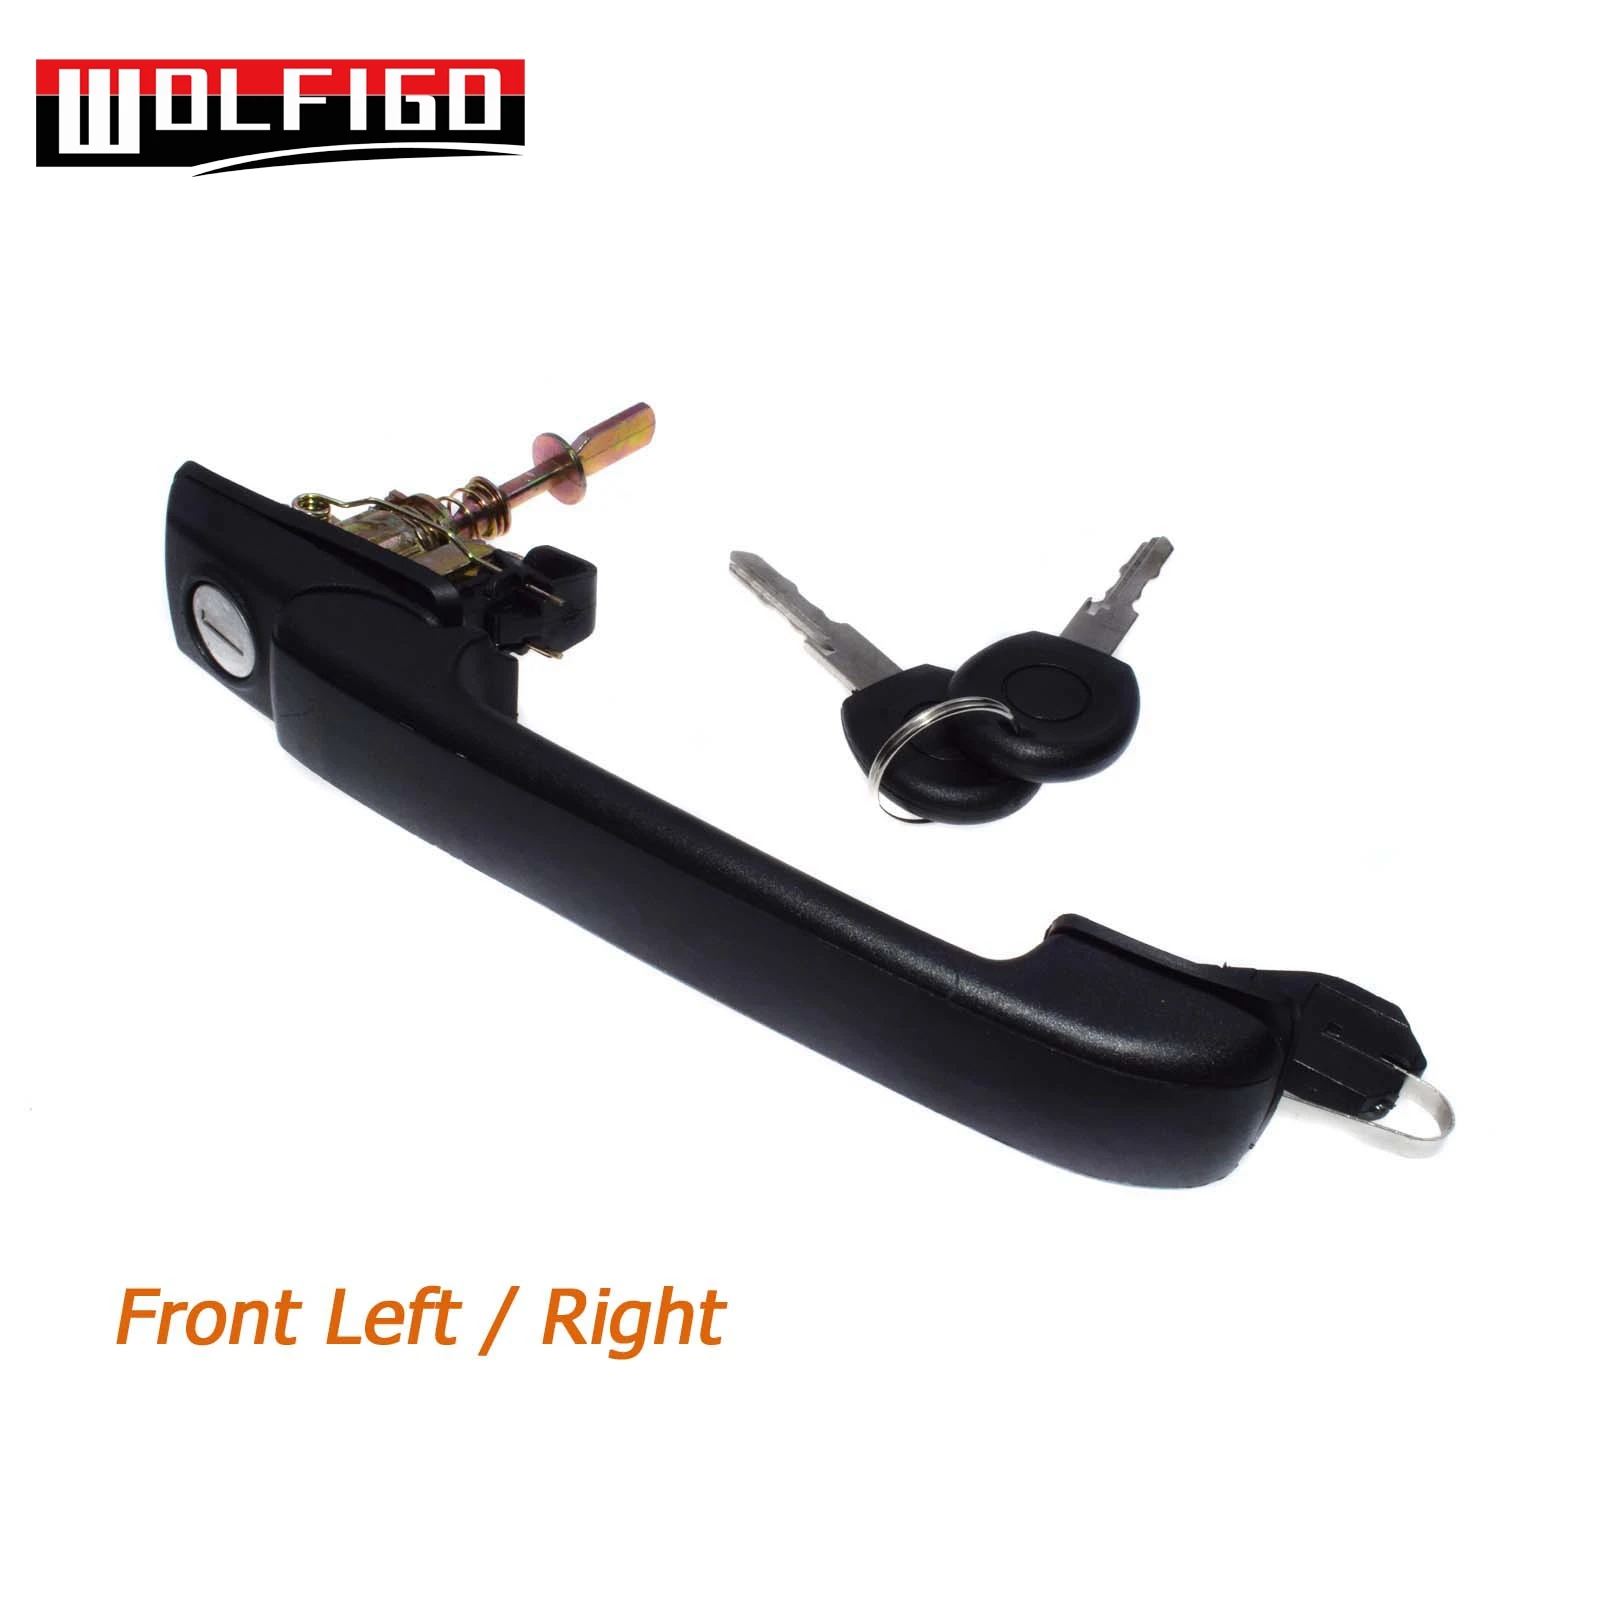 NEW Fit VW Exterior Door Handle with keys Front Left Right 1H0837207B,1H0837207C